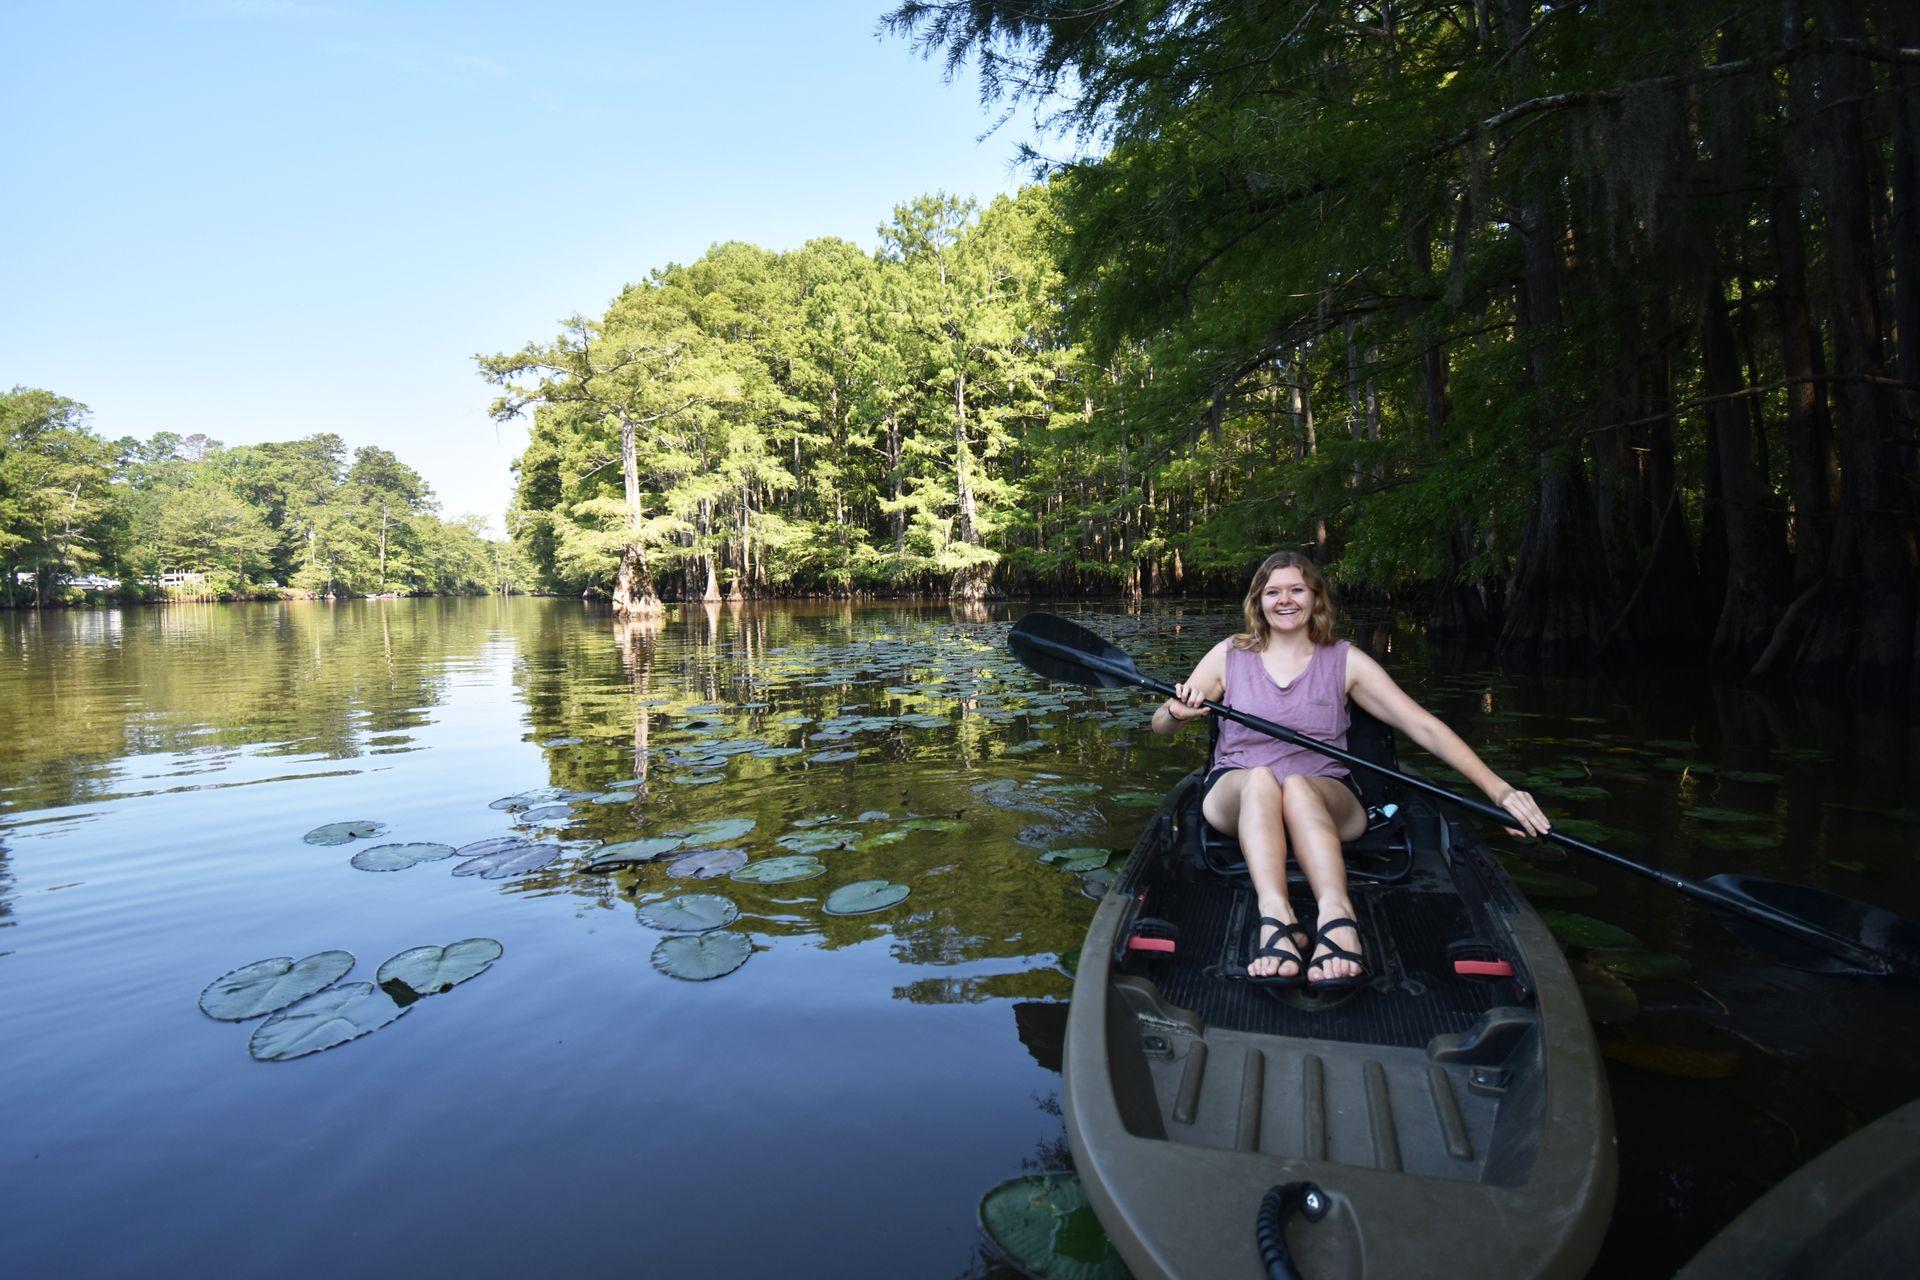 Lydia sitting in a kayak on the Big Cypress Bayou. There is a large river area behind her with cypress trees along the shore.